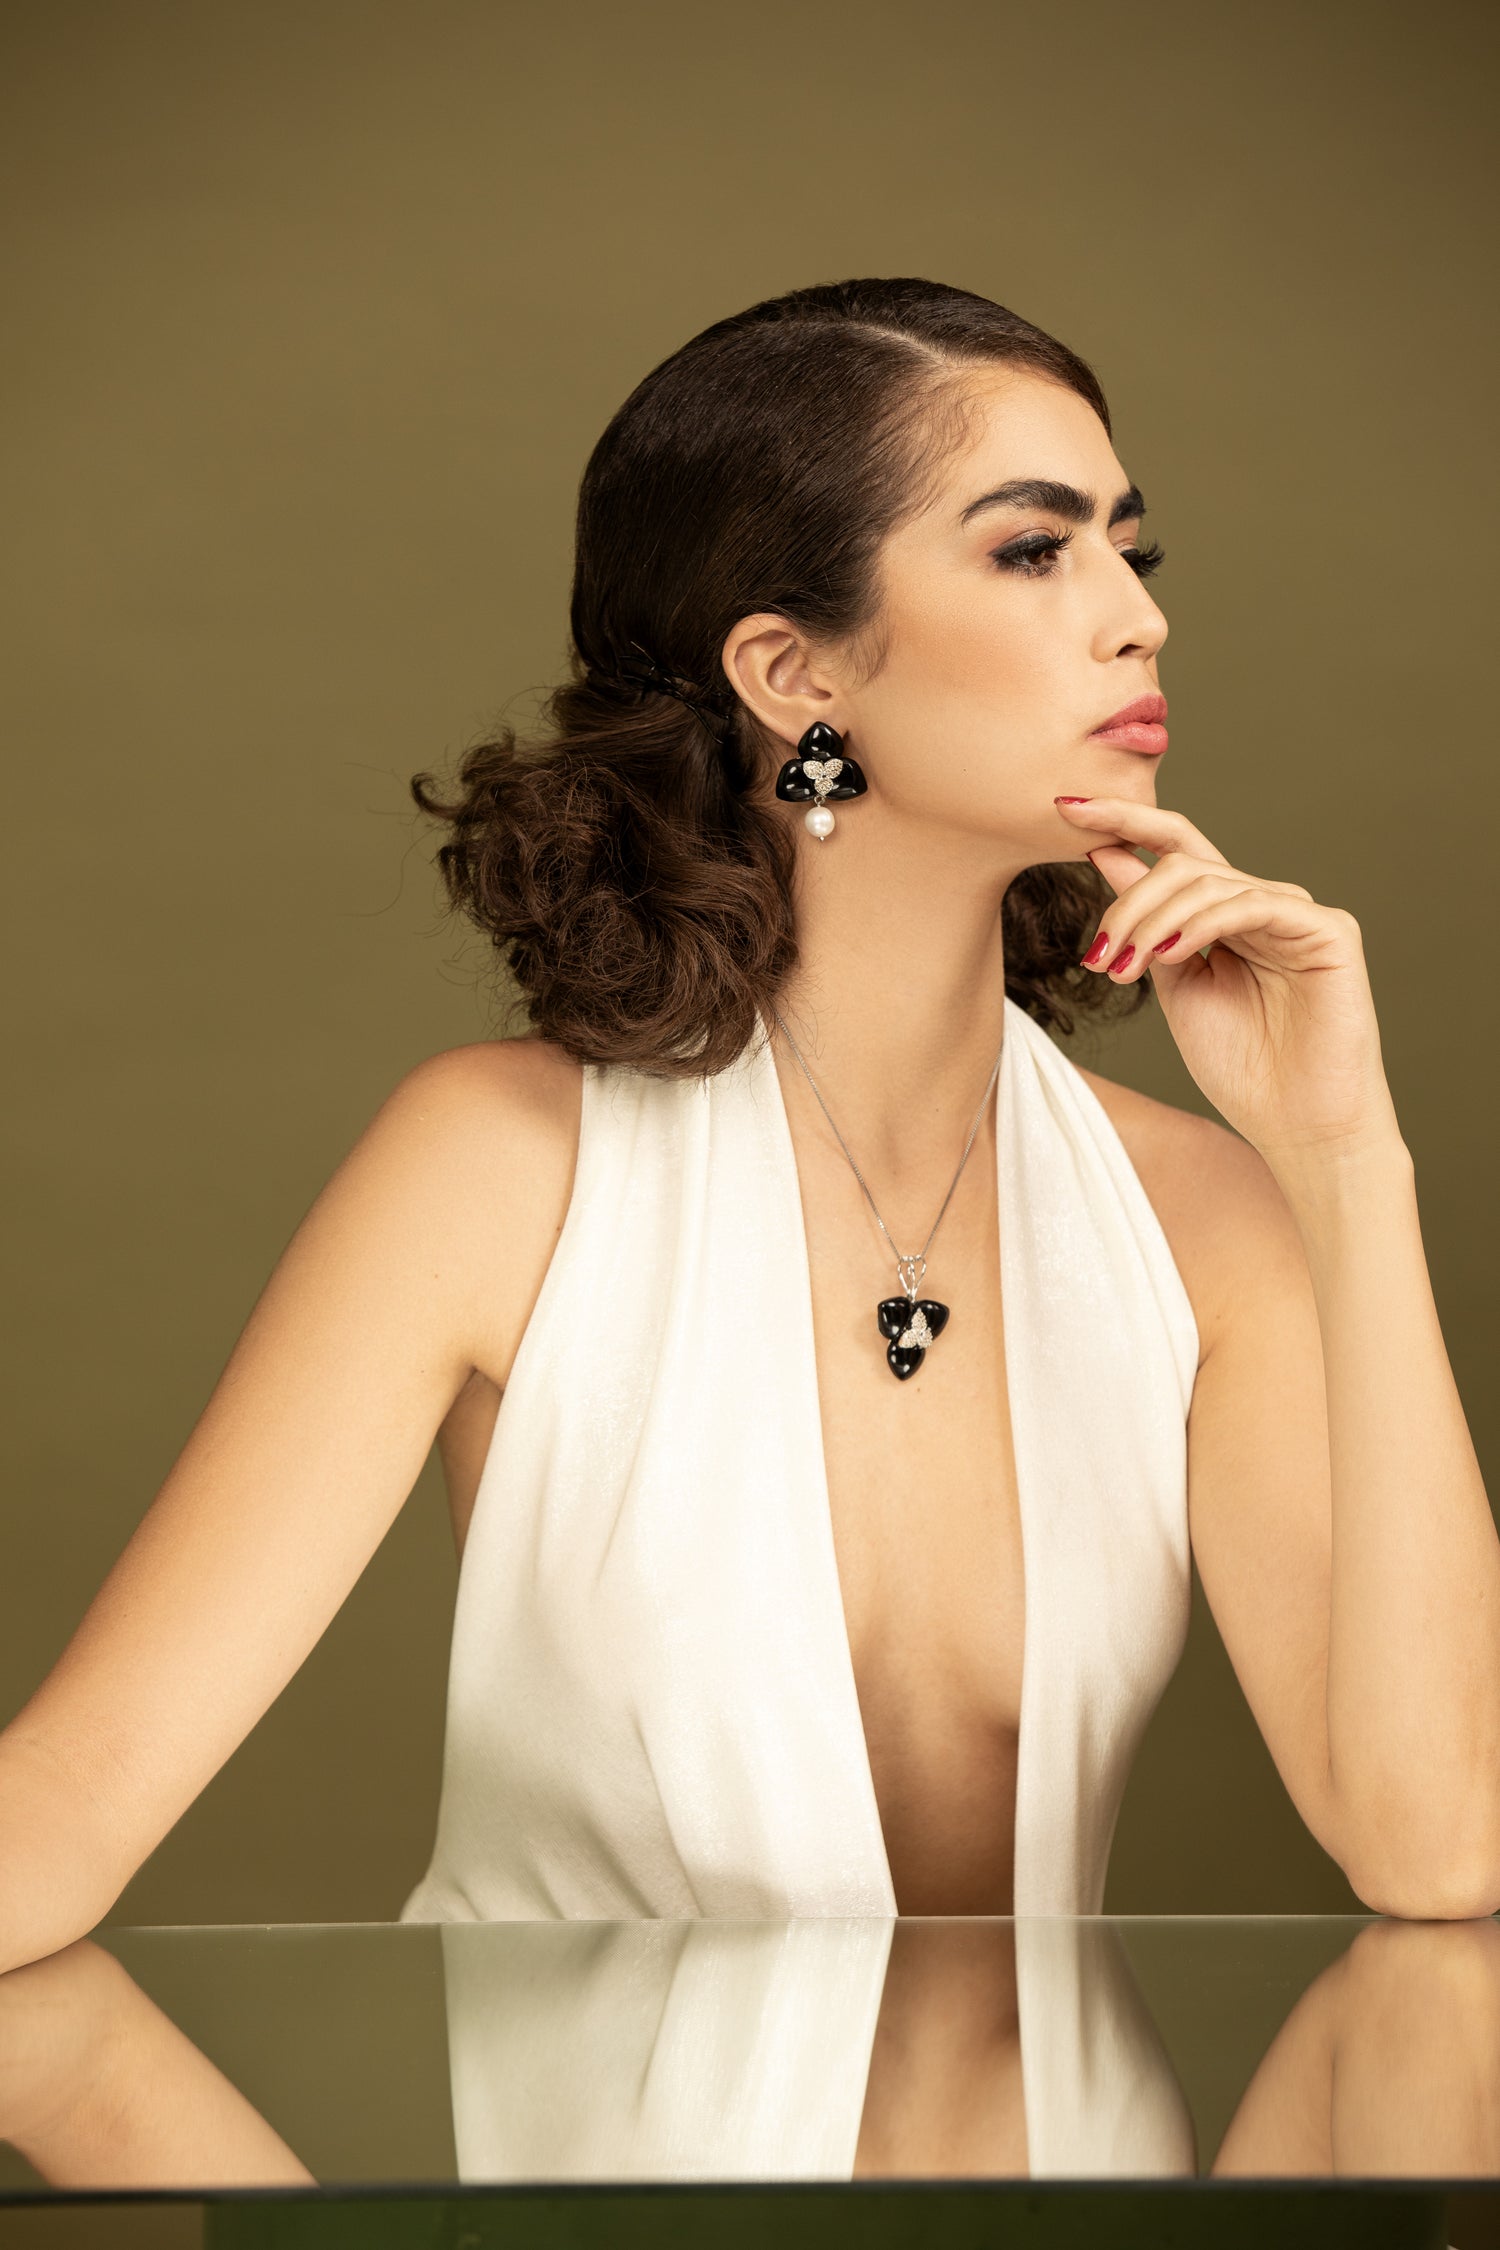 Timeless Elegance: Black Stone Jewelry Set with Swarovski Bud Detail. Adds sophistication to any outfit with its vintage-inspired design